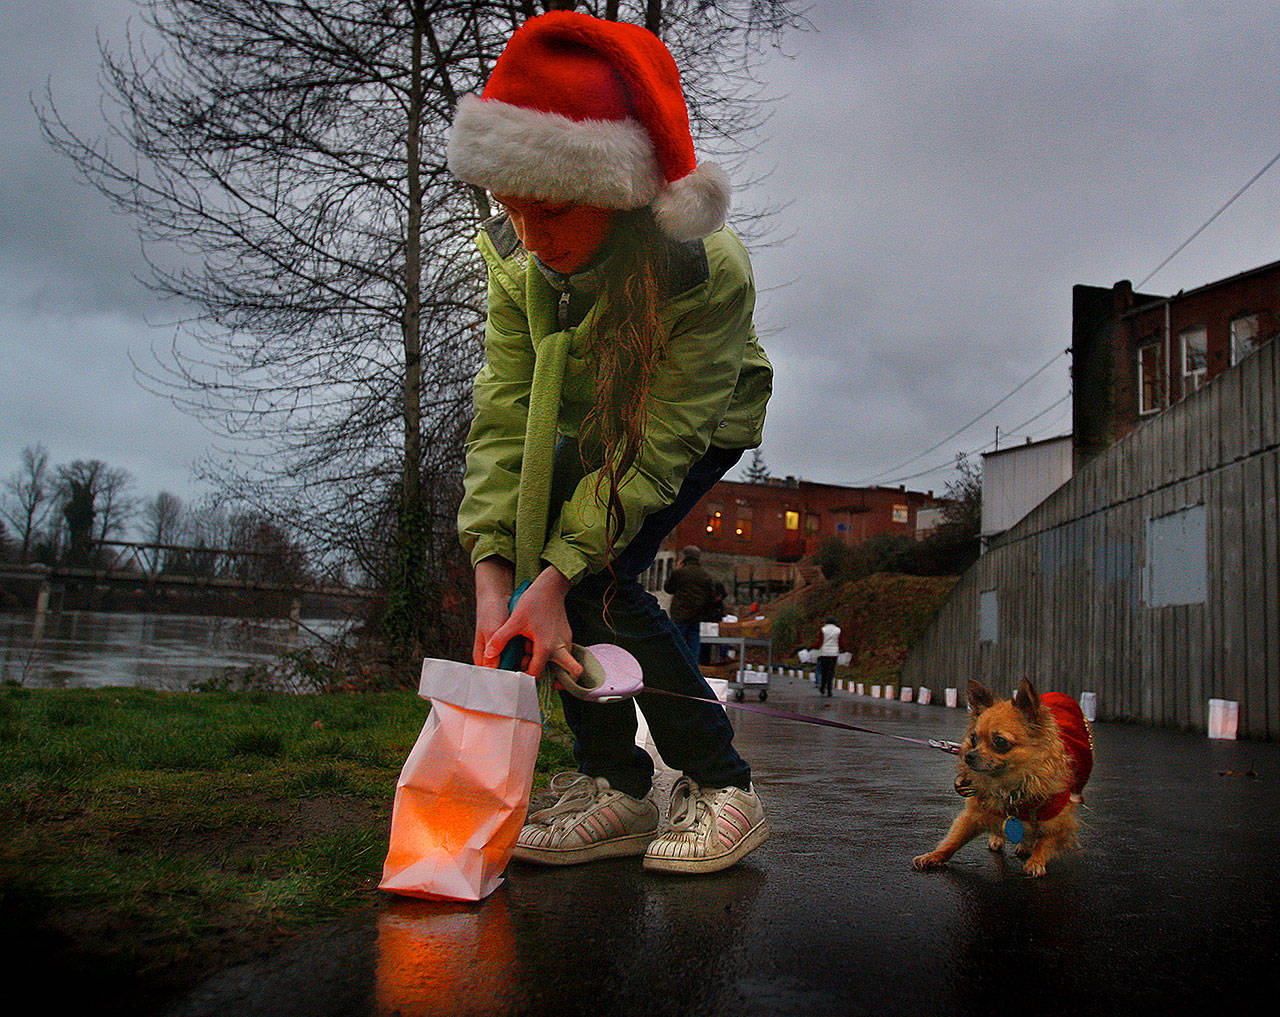 In this 2009 photo, Christina Deierling, of Snohomish, lights candles along the Riverfront Trail in old Snohomish, despite objections from her little dog, Bella, who appeared quite nervous about the flame in the bag. When the lighting was finished, people took a candlelight walk to celebrate the winter solstice. (Dan Bates / The Herald)